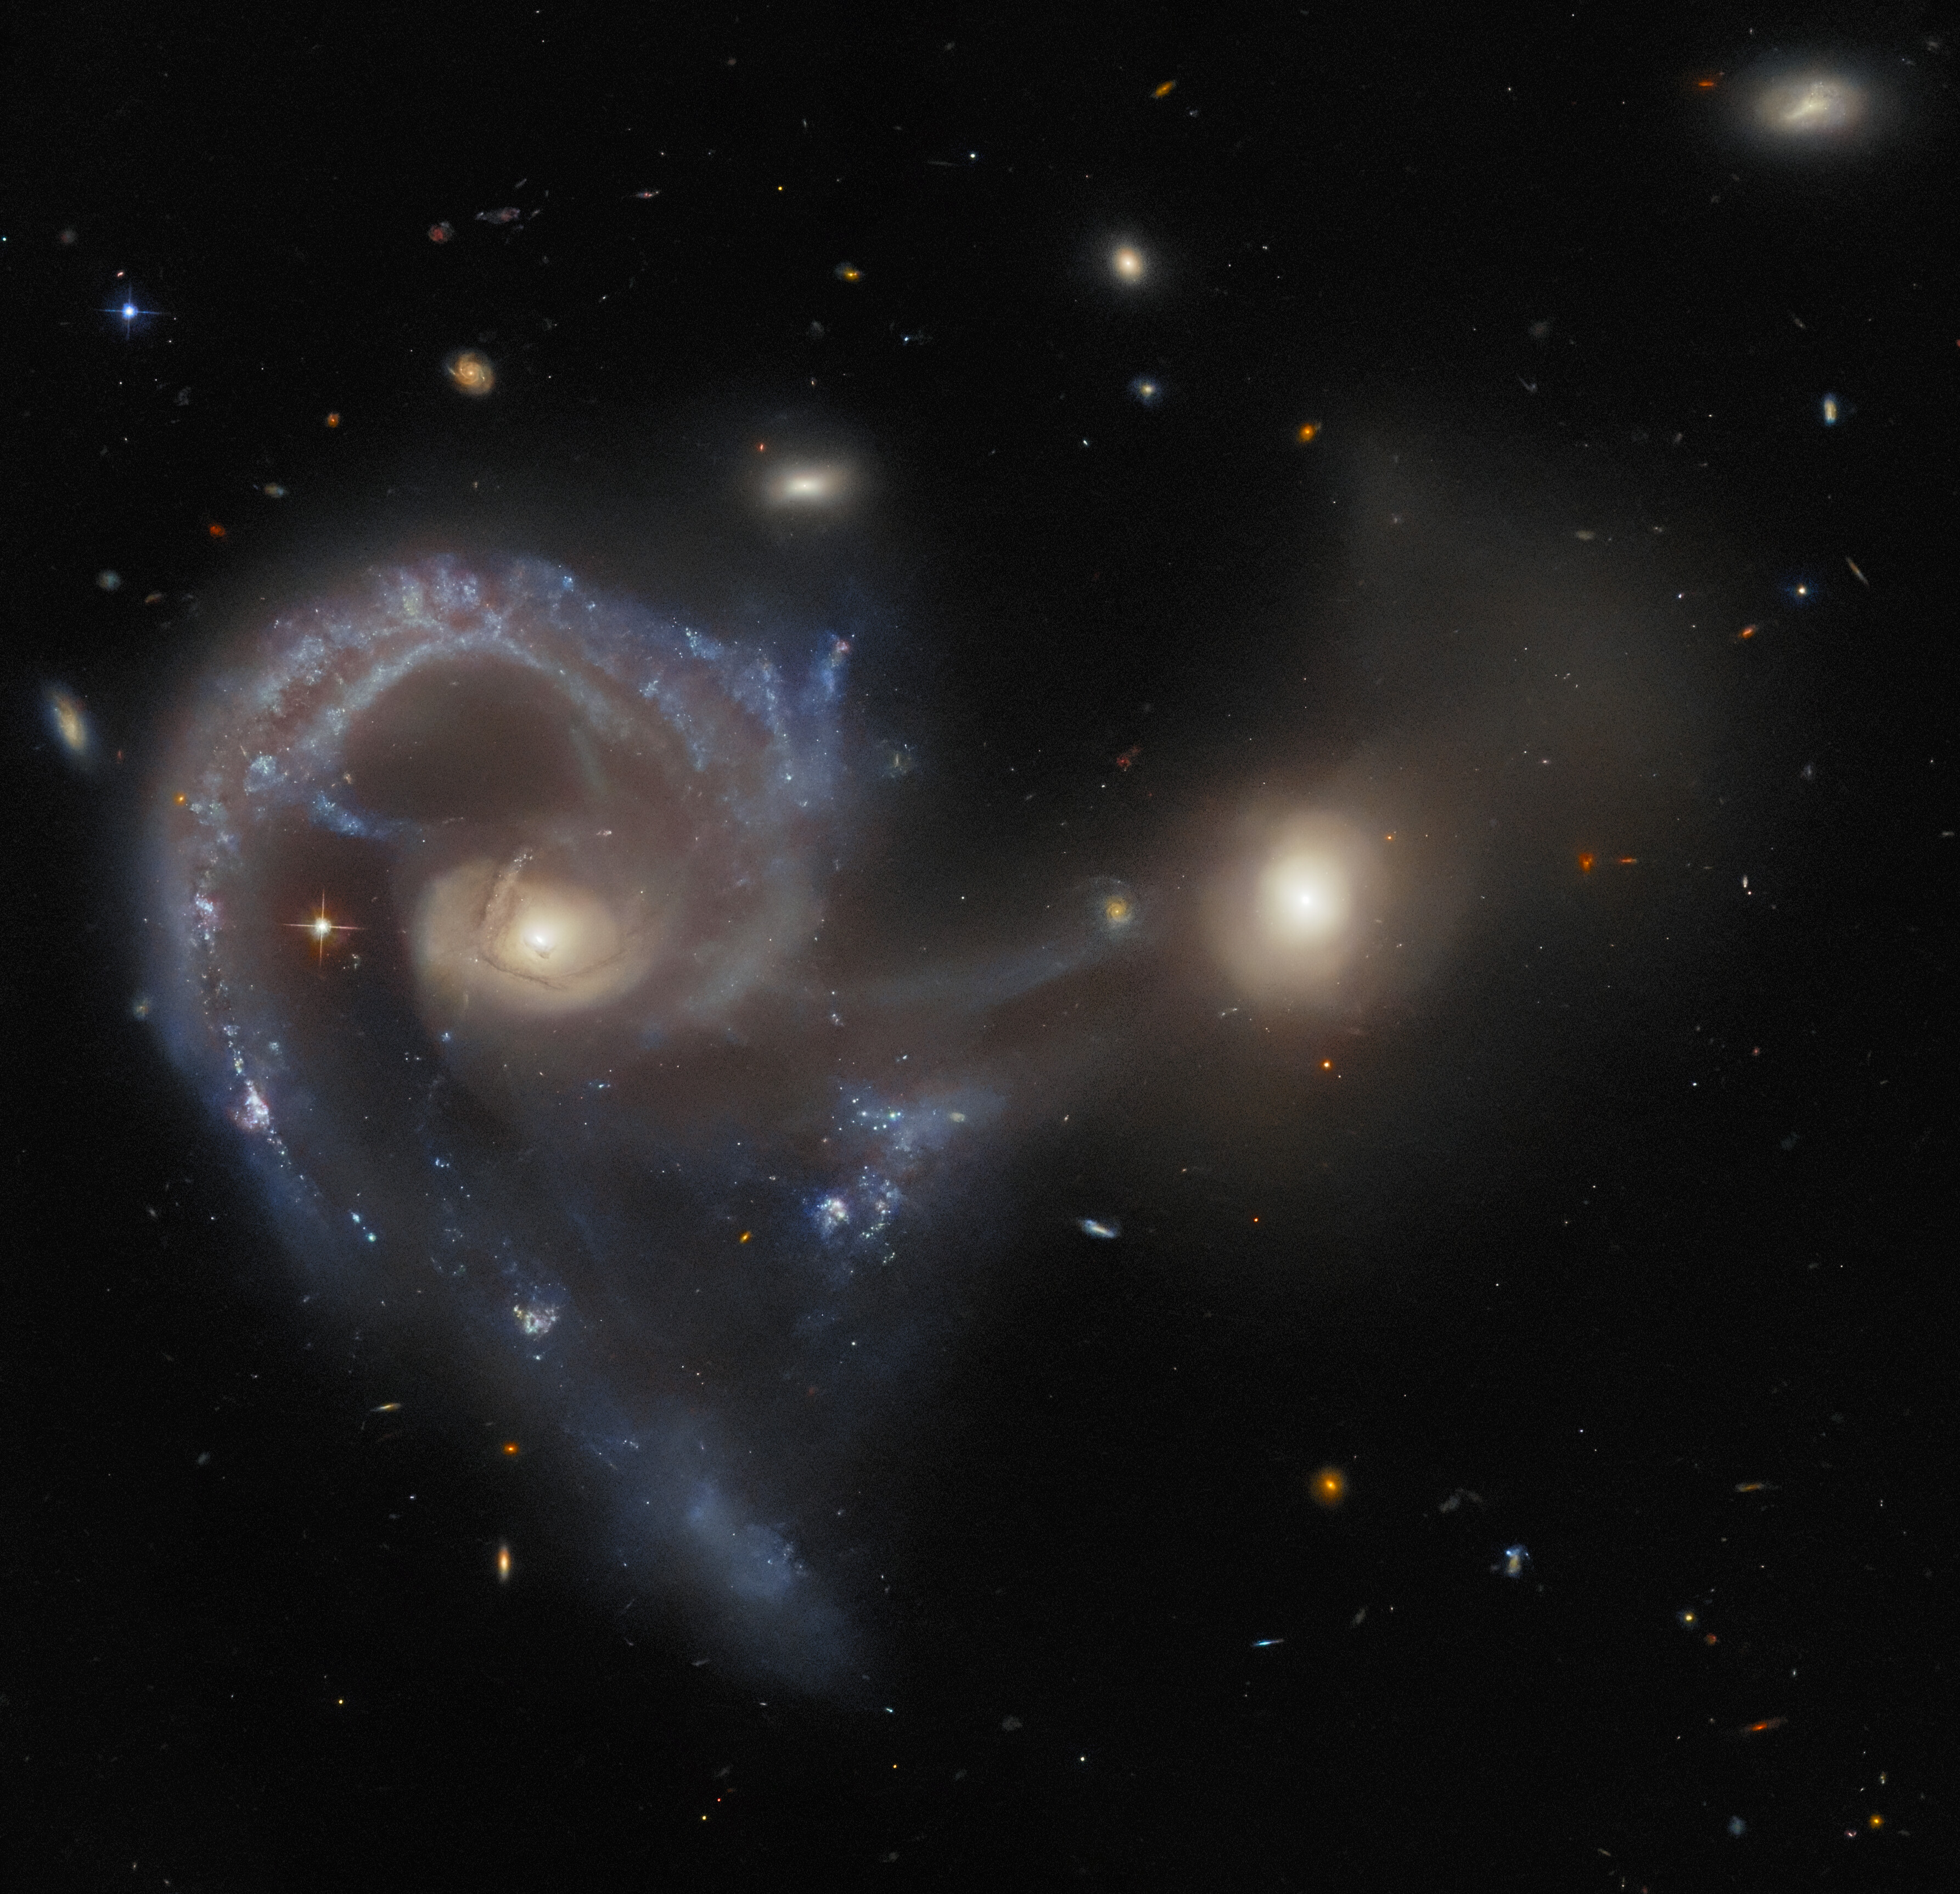 A pair of merging galaxies. The galaxy on the left has a large, single spiral arm curving out from the core and around to below it, with very visible glowing dust and gas. The right galaxy has a bright core but only a bit of very faint material. A broad curtain of gas connects the two galaxies’ cores and hangs beneath them. A few small stars and galaxies are scattered around the black background.